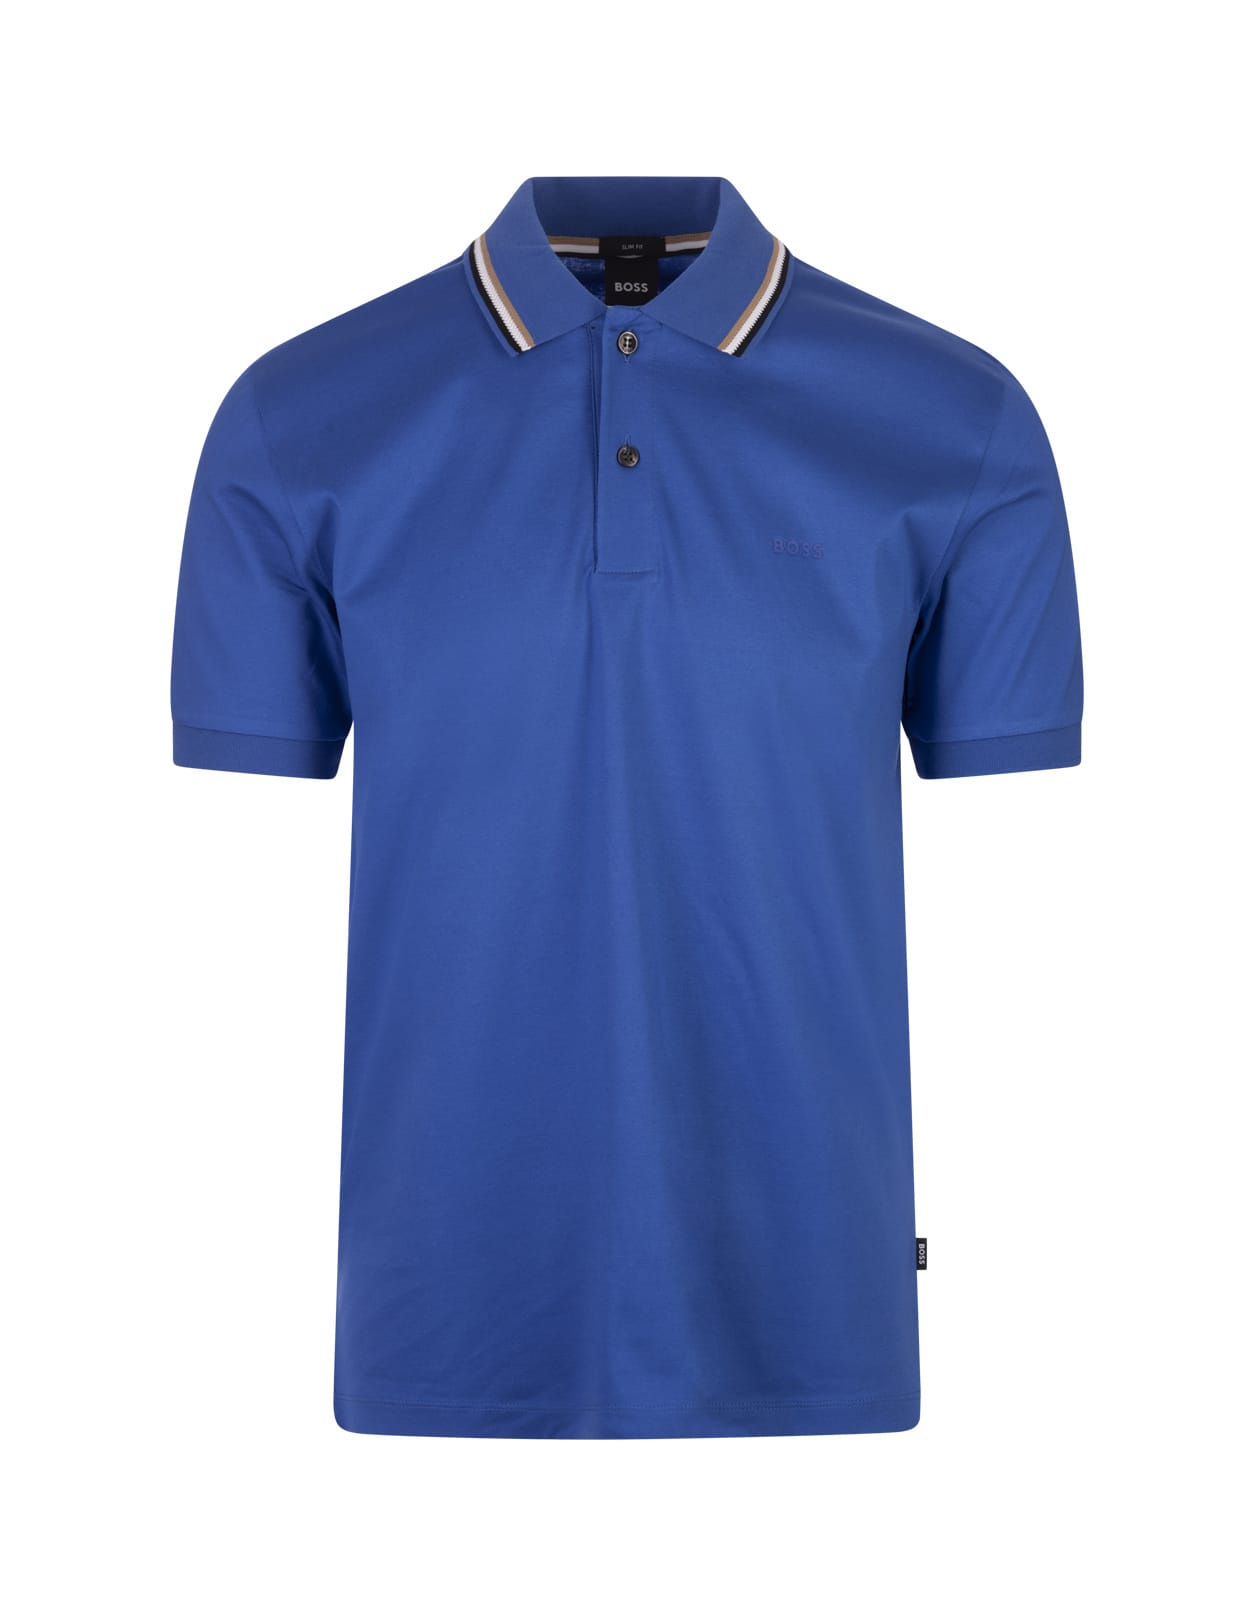 Royal Blue Slim Fit Polo Shirt With Striped Collar